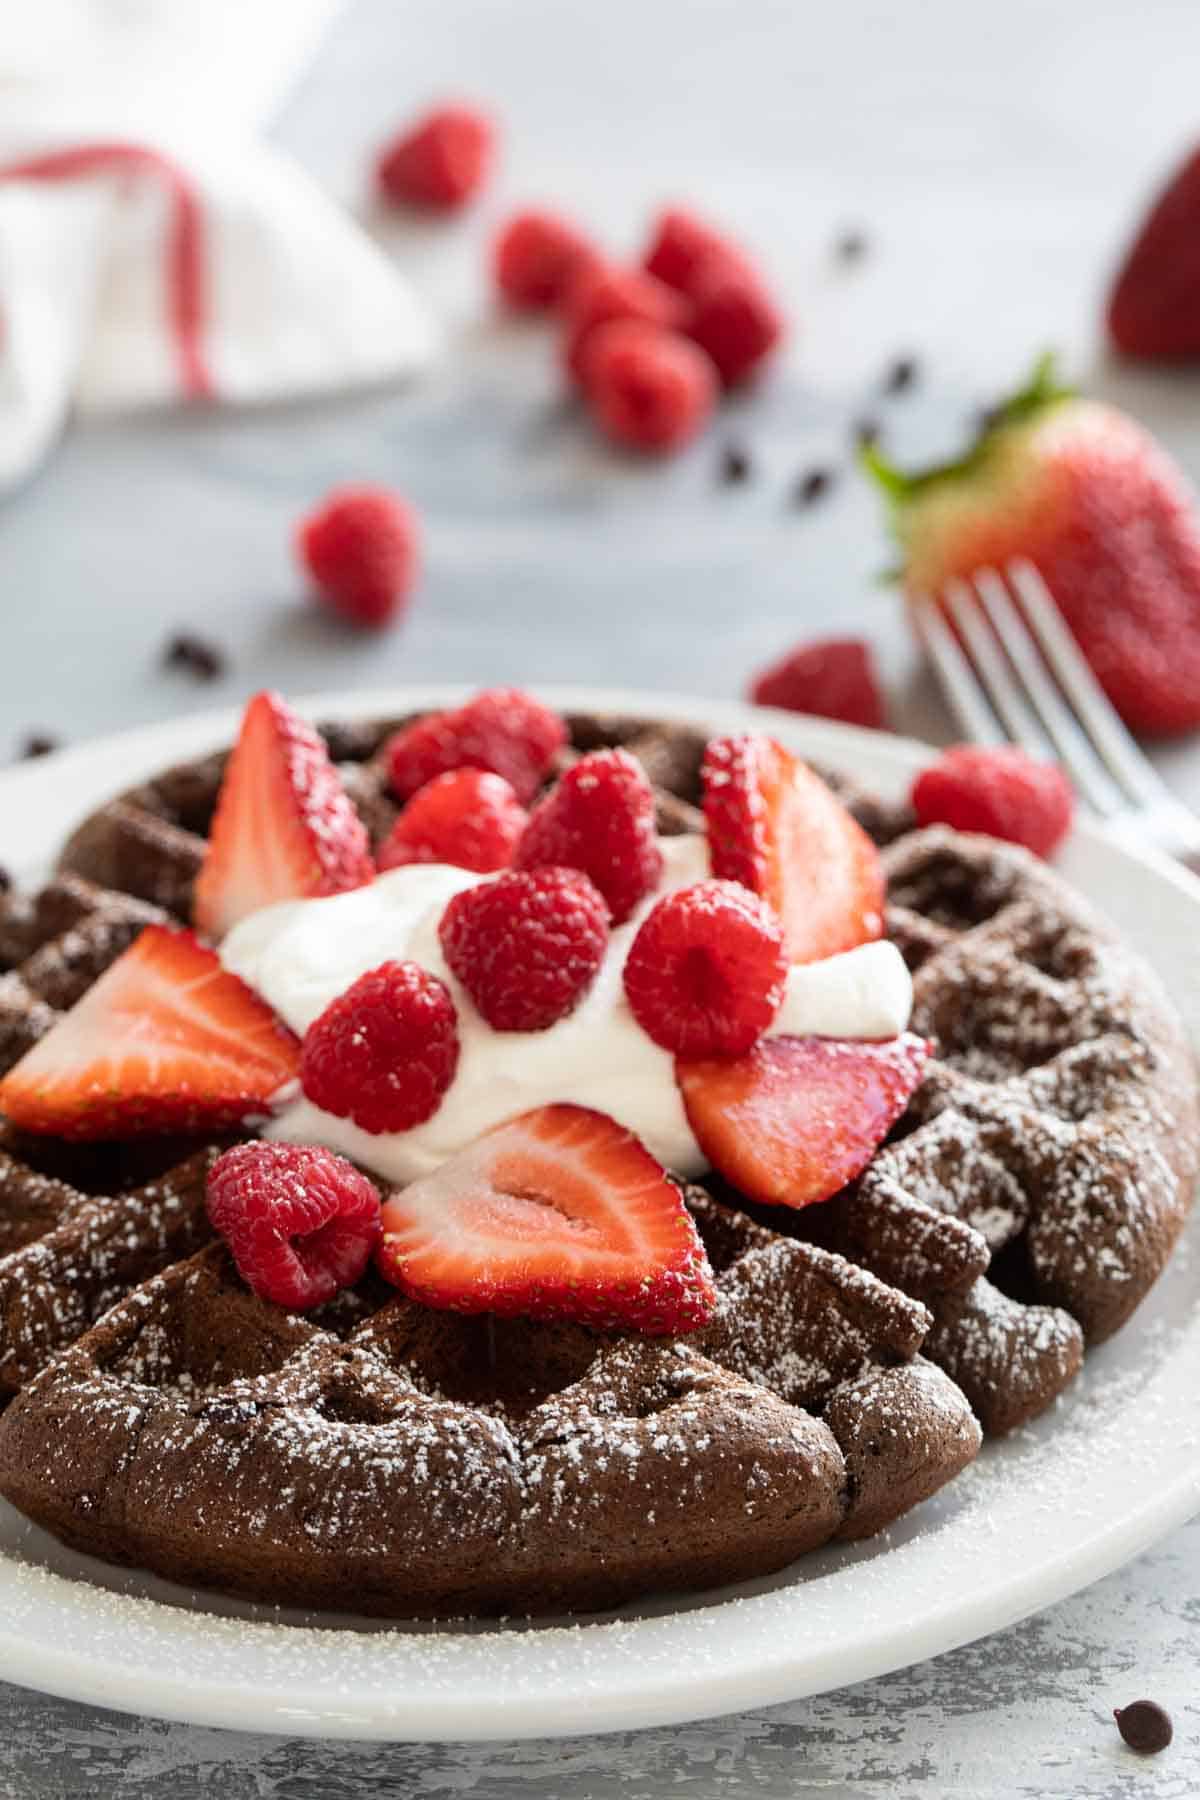 Chocolate Waffle topped with berries and whipped cream with berries in the background.